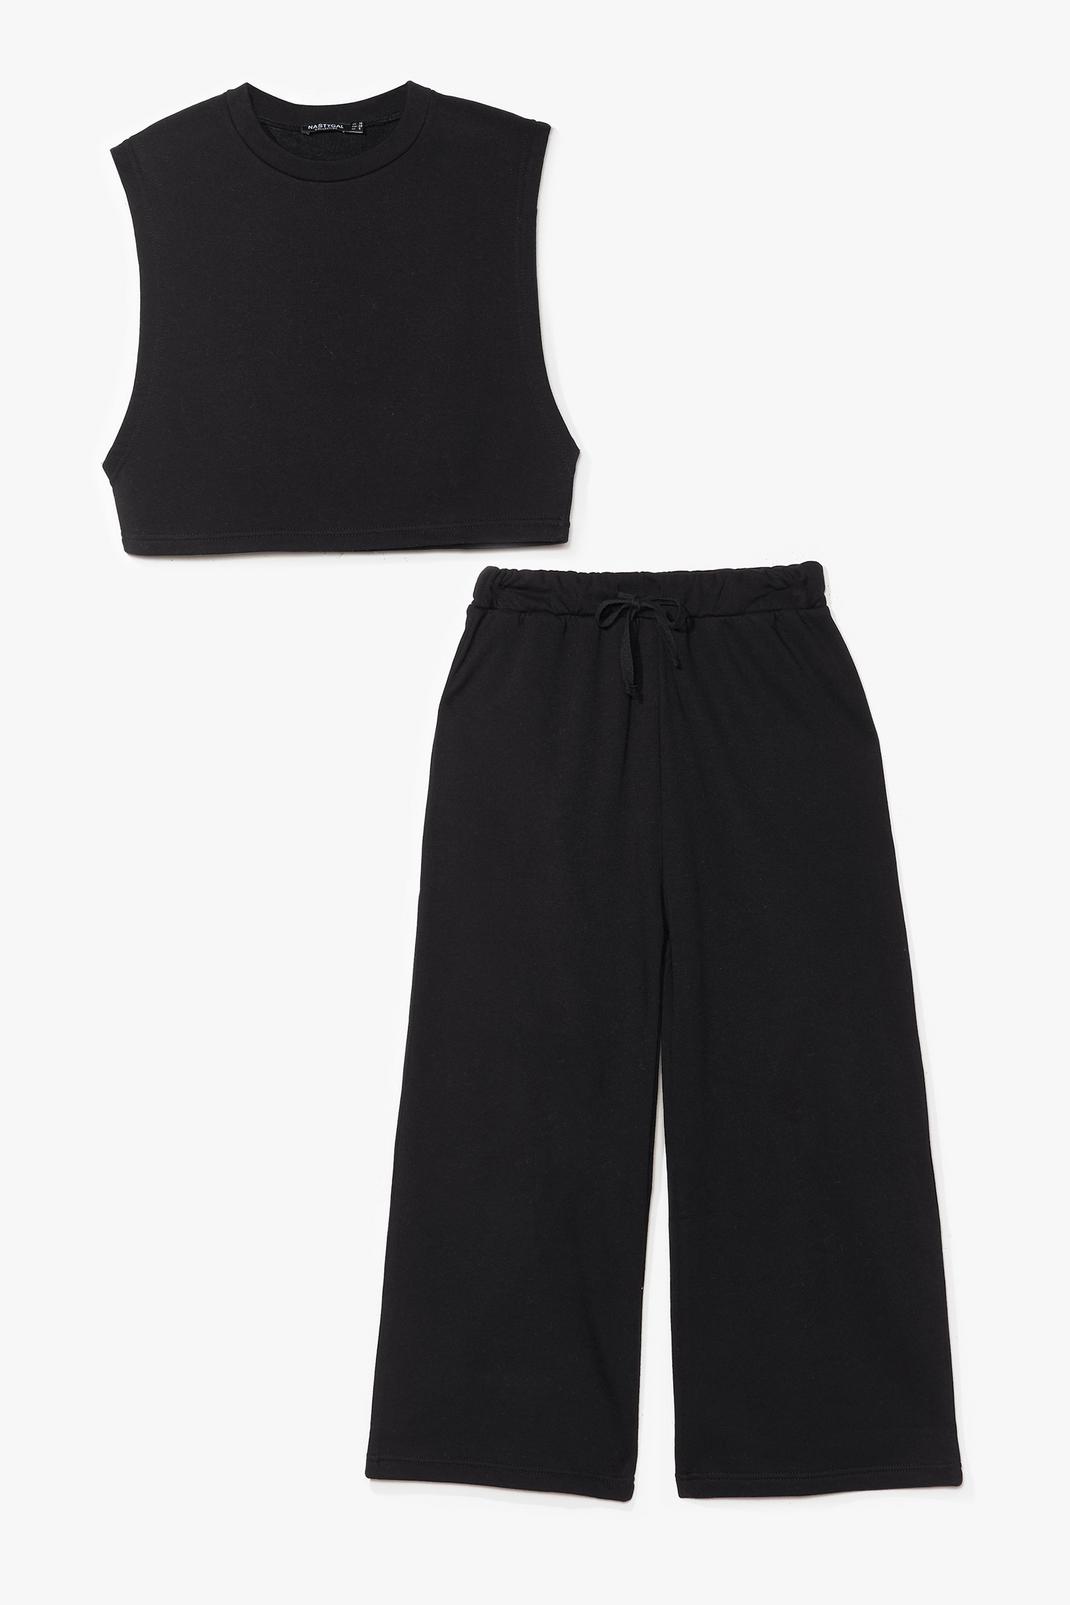 Black It's Up to Tee Cropped Tank Top and Pants Set image number 1